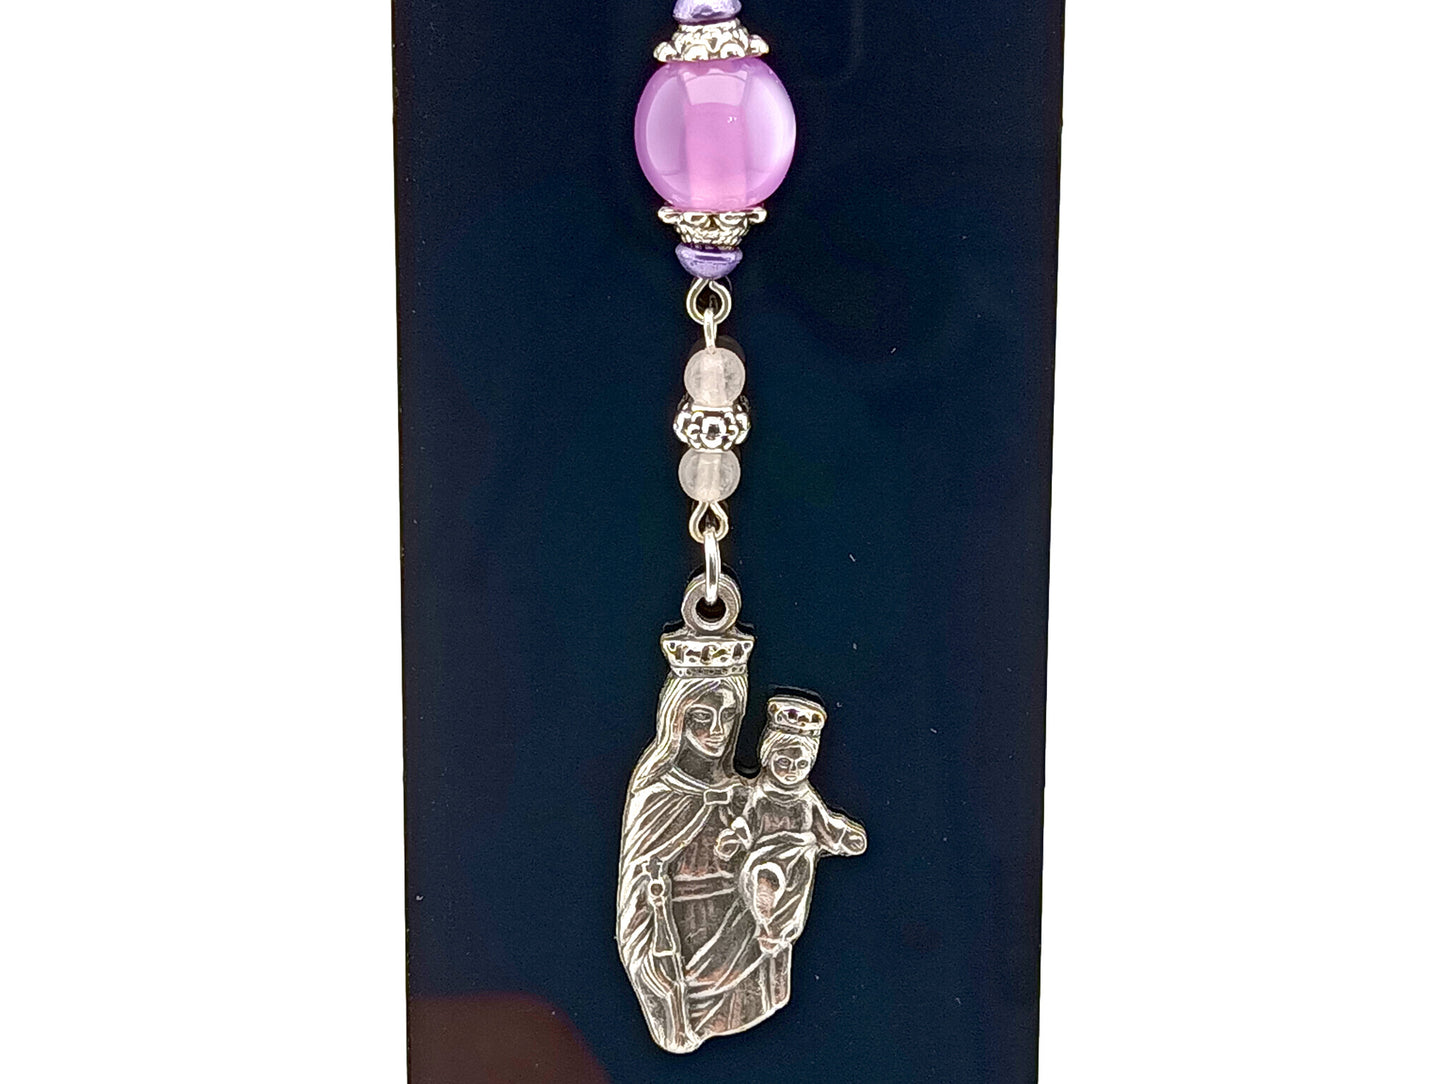 Our Lady of Mount Carmel unique rosary beads purse clip key chain with lilac glass bead, silver  medal and lobster clasp.